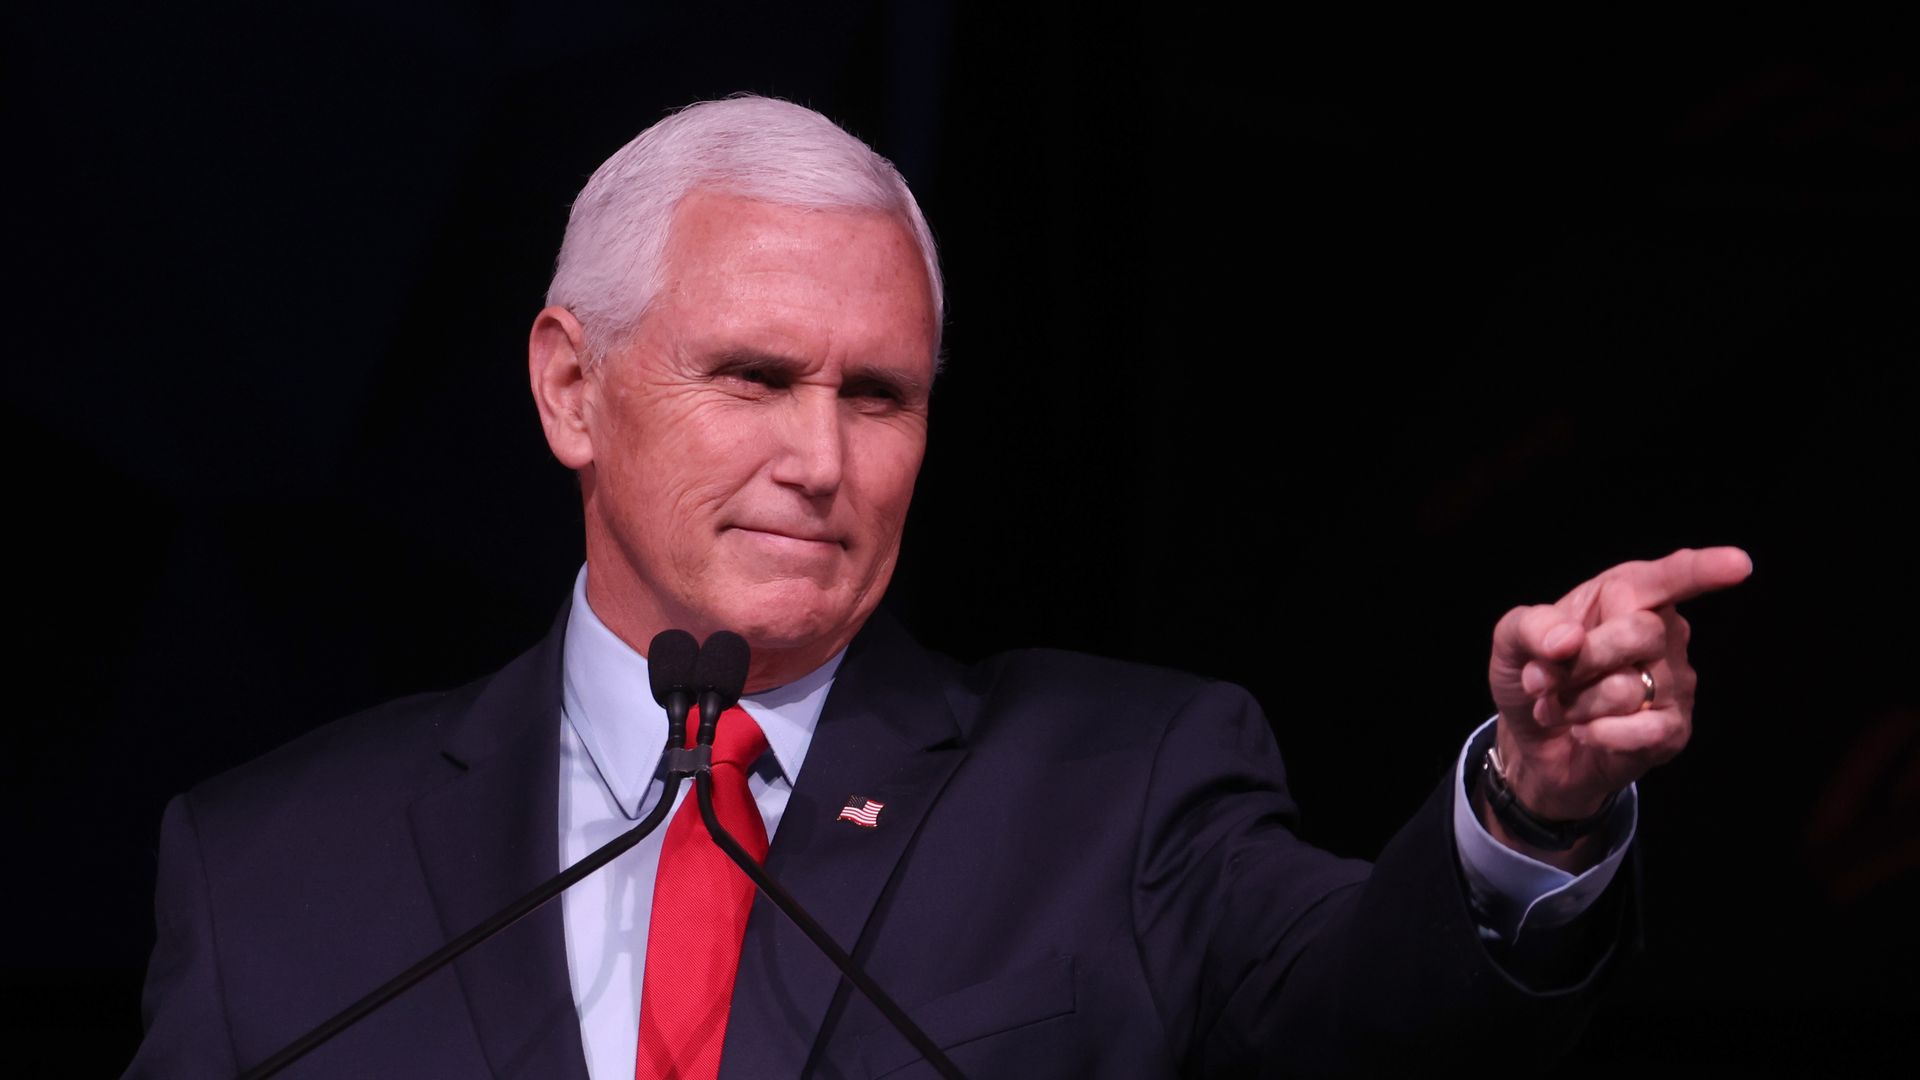 Former Vice President Mike Pence smiles from a podium and points at someone with his left hand index finger